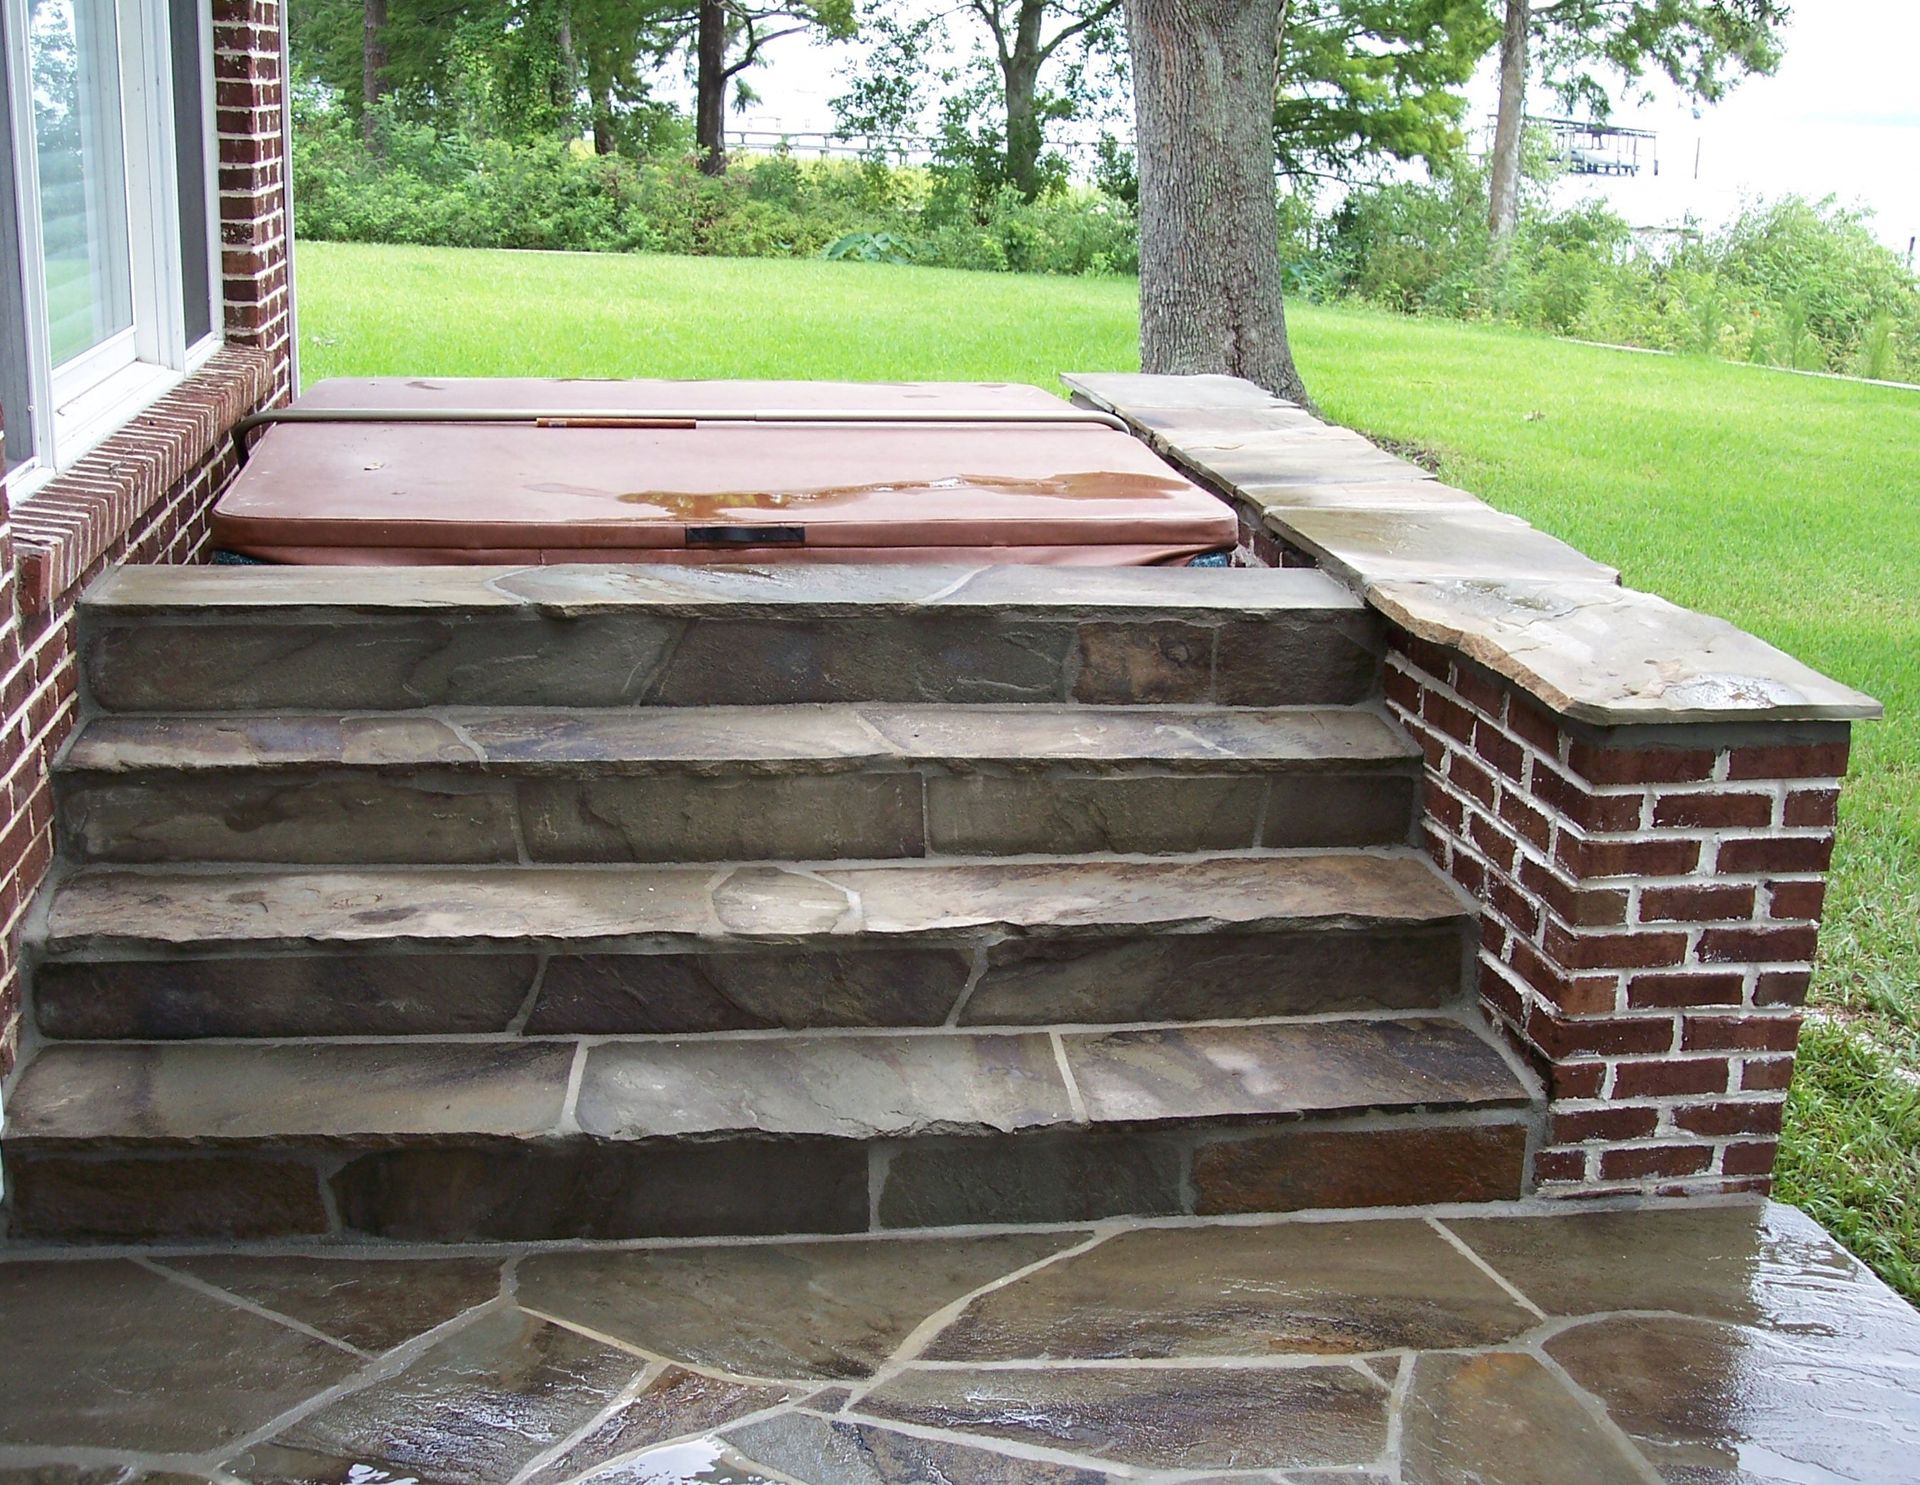 hardscape, paver, pavers, patio, paver patio, paver patios, driveway, paver driveway, paver driveways, walkway, paver walkway, paver landscaping, stone steps, paver steps, pool deck, paver pool deck, paver pool decking, pool coping, natural stone, stone, stacked stone, veneer, stone veneer, flagstone, bluestone, thermal bluestone, spa design, pool deck design, outdoor kitchen, summer kitchen, fire pit, firepit, sitting wall, pergola, hand-made pergola, seating area, outdoor living, outdoor entertaining, paver contractor, paver design, paver install, paver installation, paver expert, paver experts, warranty, labor warranty, expert installation, expert install, licensed and insured, licensed, insured, licensed insured, award winning designs, Angie's List Super Service Award, Angie's List Award, customer reviews, excellent reputation, reputation, fireplace, fireplace renovation, stone fireplace, fireplace veneer, fireplace reconstruction, before and after pictures, years experience, experienced, Jacksonville, Ponte Vedra, Nocatee, Fleming Island, Queens Harbor, St. Johns, Fruit Cove, St. Augustine, Jacksonville pavers, paver driveway Jacksonville, Jacksonville paver driveway, Jacksonville driveway, paver patio Jacksonville, patio Jacksonville, Jacksonville paver patio, Jacksonville patio, Ponte Vedra pavers, paver driveway Ponte Vedra, driveway Ponte Vedra, Ponte Vedra paver driveway, Ponte Vedra driveway, paver patio Ponte Vedra, patio Ponte Vedra, Ponte Vedra paver patio, Ponte Vedra patio, Nocatee pavers, driveway Nocatee, paver driveway Nocatee, Nocatee driveway, Nocatee paver driveway, paver patio Nocatee, patio Nocatee, Nocatee paver patio, Nocatee patio, Sawgrass pavers, Sawgrass paver driveway, Sawgrass driveway, driveway Sawgrass, paver driveway Sawgrass, paver patio Sawgrass, patio Sawgrass, Sawgrass patio, Sawgrass paver patio, Fleming Island pavers, Fleming Island paver driveway, paver driveway Fleming Island, Fleming Island driveway, driveway Fleming Island, paver patio Fleming Island, Fleming Island paver patio, patio Fleming Island, Fleming Island patio, Queens Harbor pavers, paver driveway Queens Harbor, Queens Harbor paver driveway, Queens Harbor driveway, driveway Queens Harbor, paver patio Queens Harbor, Queens Harbor paver patio, patio Queens Harbor, Queens Harbor patio, St. Johns pavers, St. Johns paver driveway, paver driveway St. Johns, St. Johns driveway, driveway St. Johns, St. Johns paver patio, paver patio St. Johns, patio St. Johns, St. Johns patio, Fruit Cove pavers, paver driveway Fruit Cove, Fruit Cove paver driveway, driveway Fruit Cove, Fruit Cove driveway, Fruit Cove paver patio, paver patio Fruit Cove, patio Fruit Cove, Fruit Cove patio, St. Augustine pavers, paver driveway St. Augustine, St. Augustine paver driveway, driveway St. Augustine, St. Augustine driveway, St. Augustine patio, patio St Augustine, St. Augustine paver patio, paver patio St. Augustine, Mandarin pavers, Mandarin paver driveway, paver driveway Mandarin, driveway Mandarin, Mandarin driveway, paver patio Mandarin, Mandarin paver patio, patio Mandarin, Mandarin patio